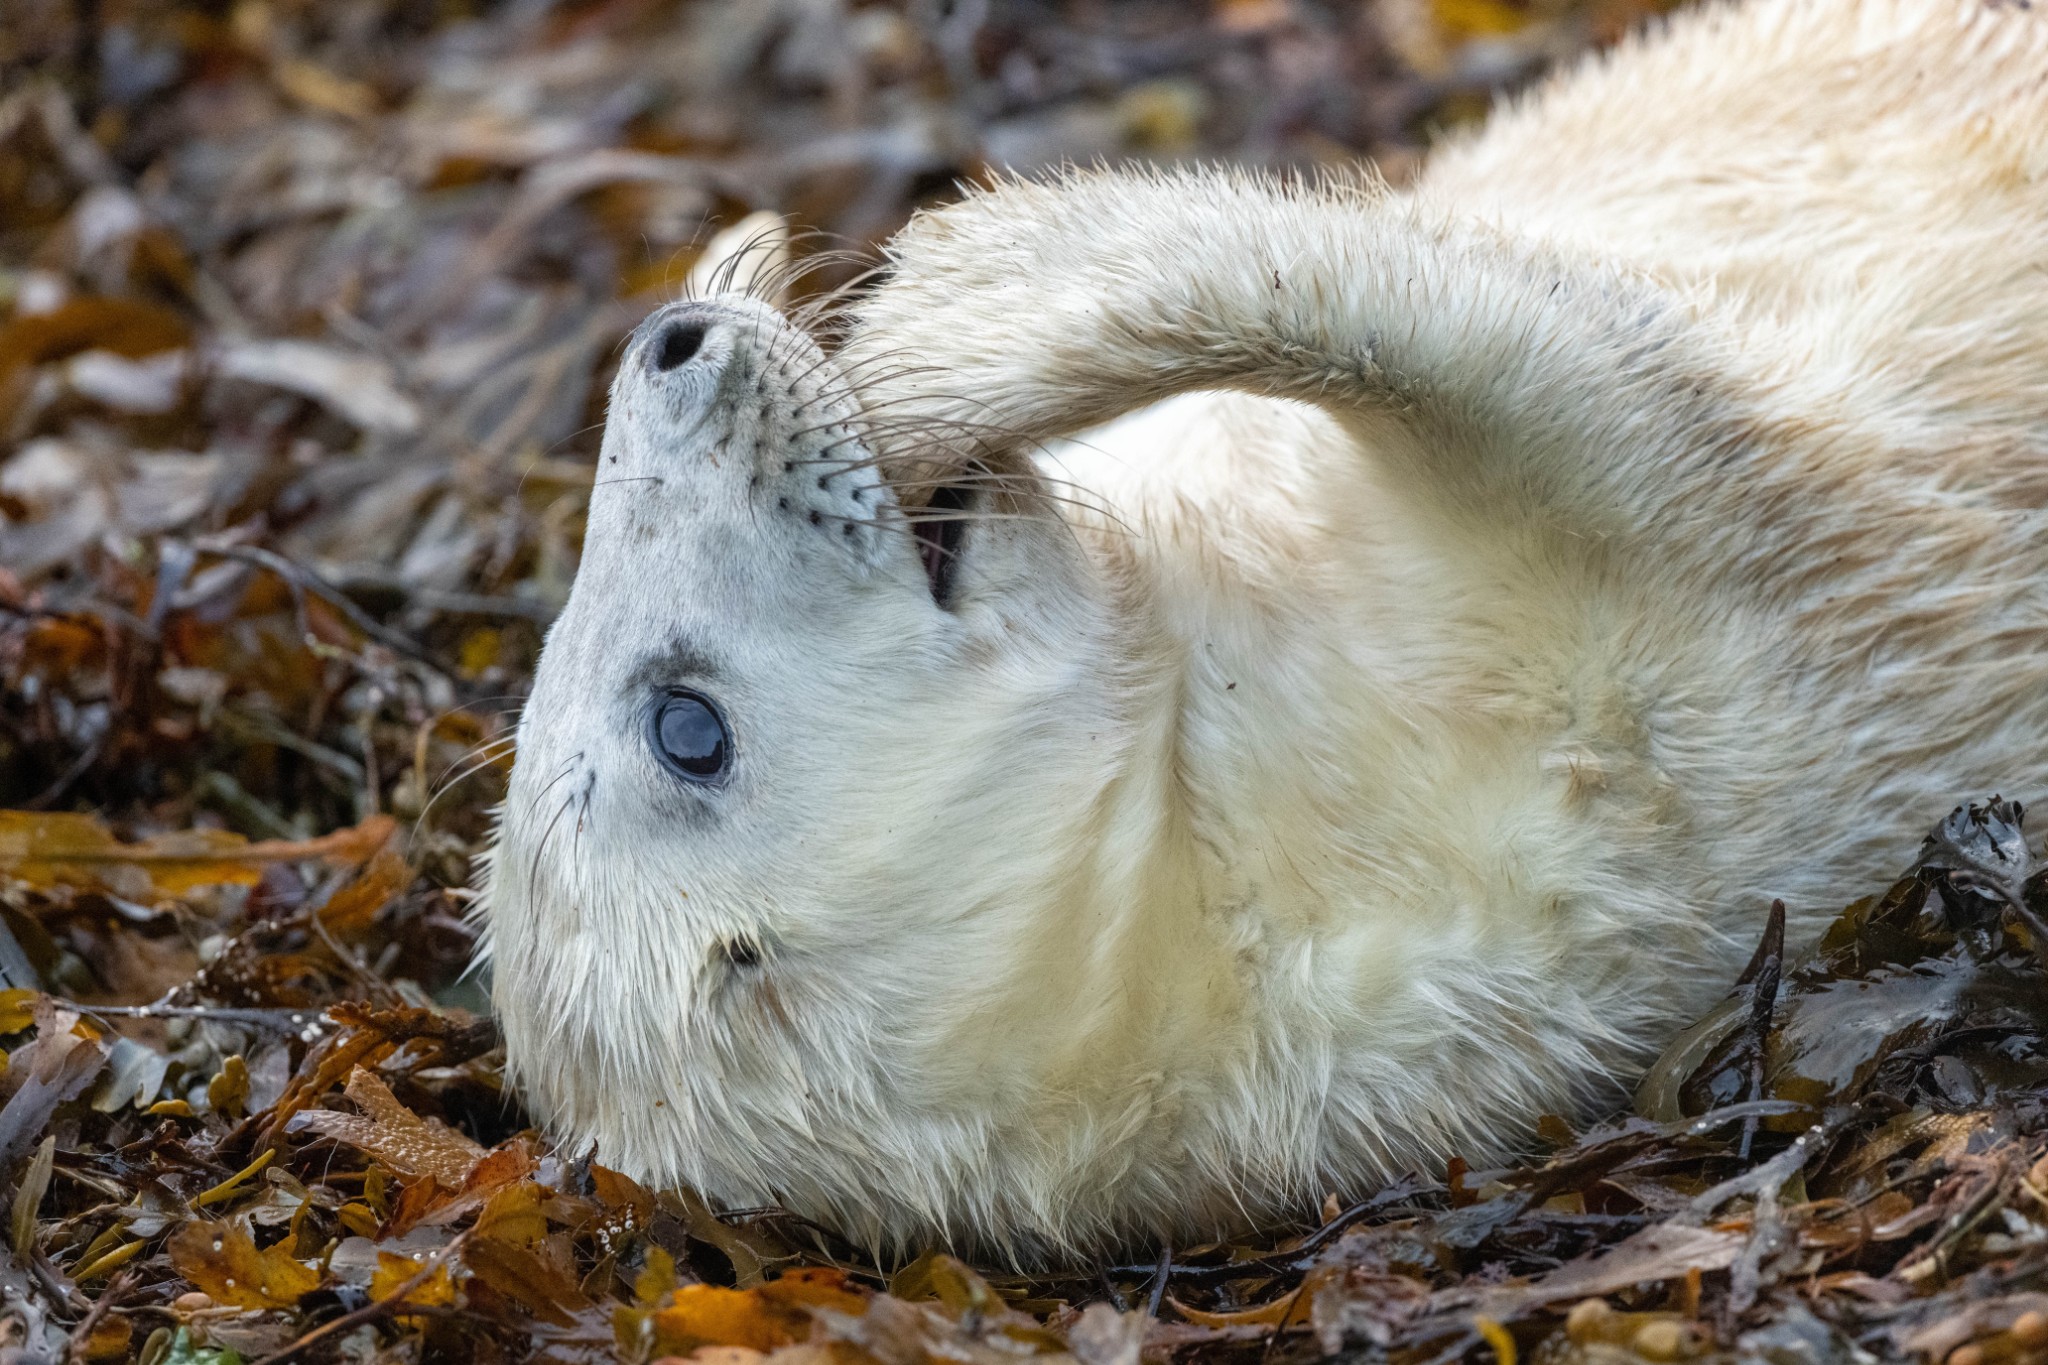 Grey seal in Orkney - image by Raymond Besant